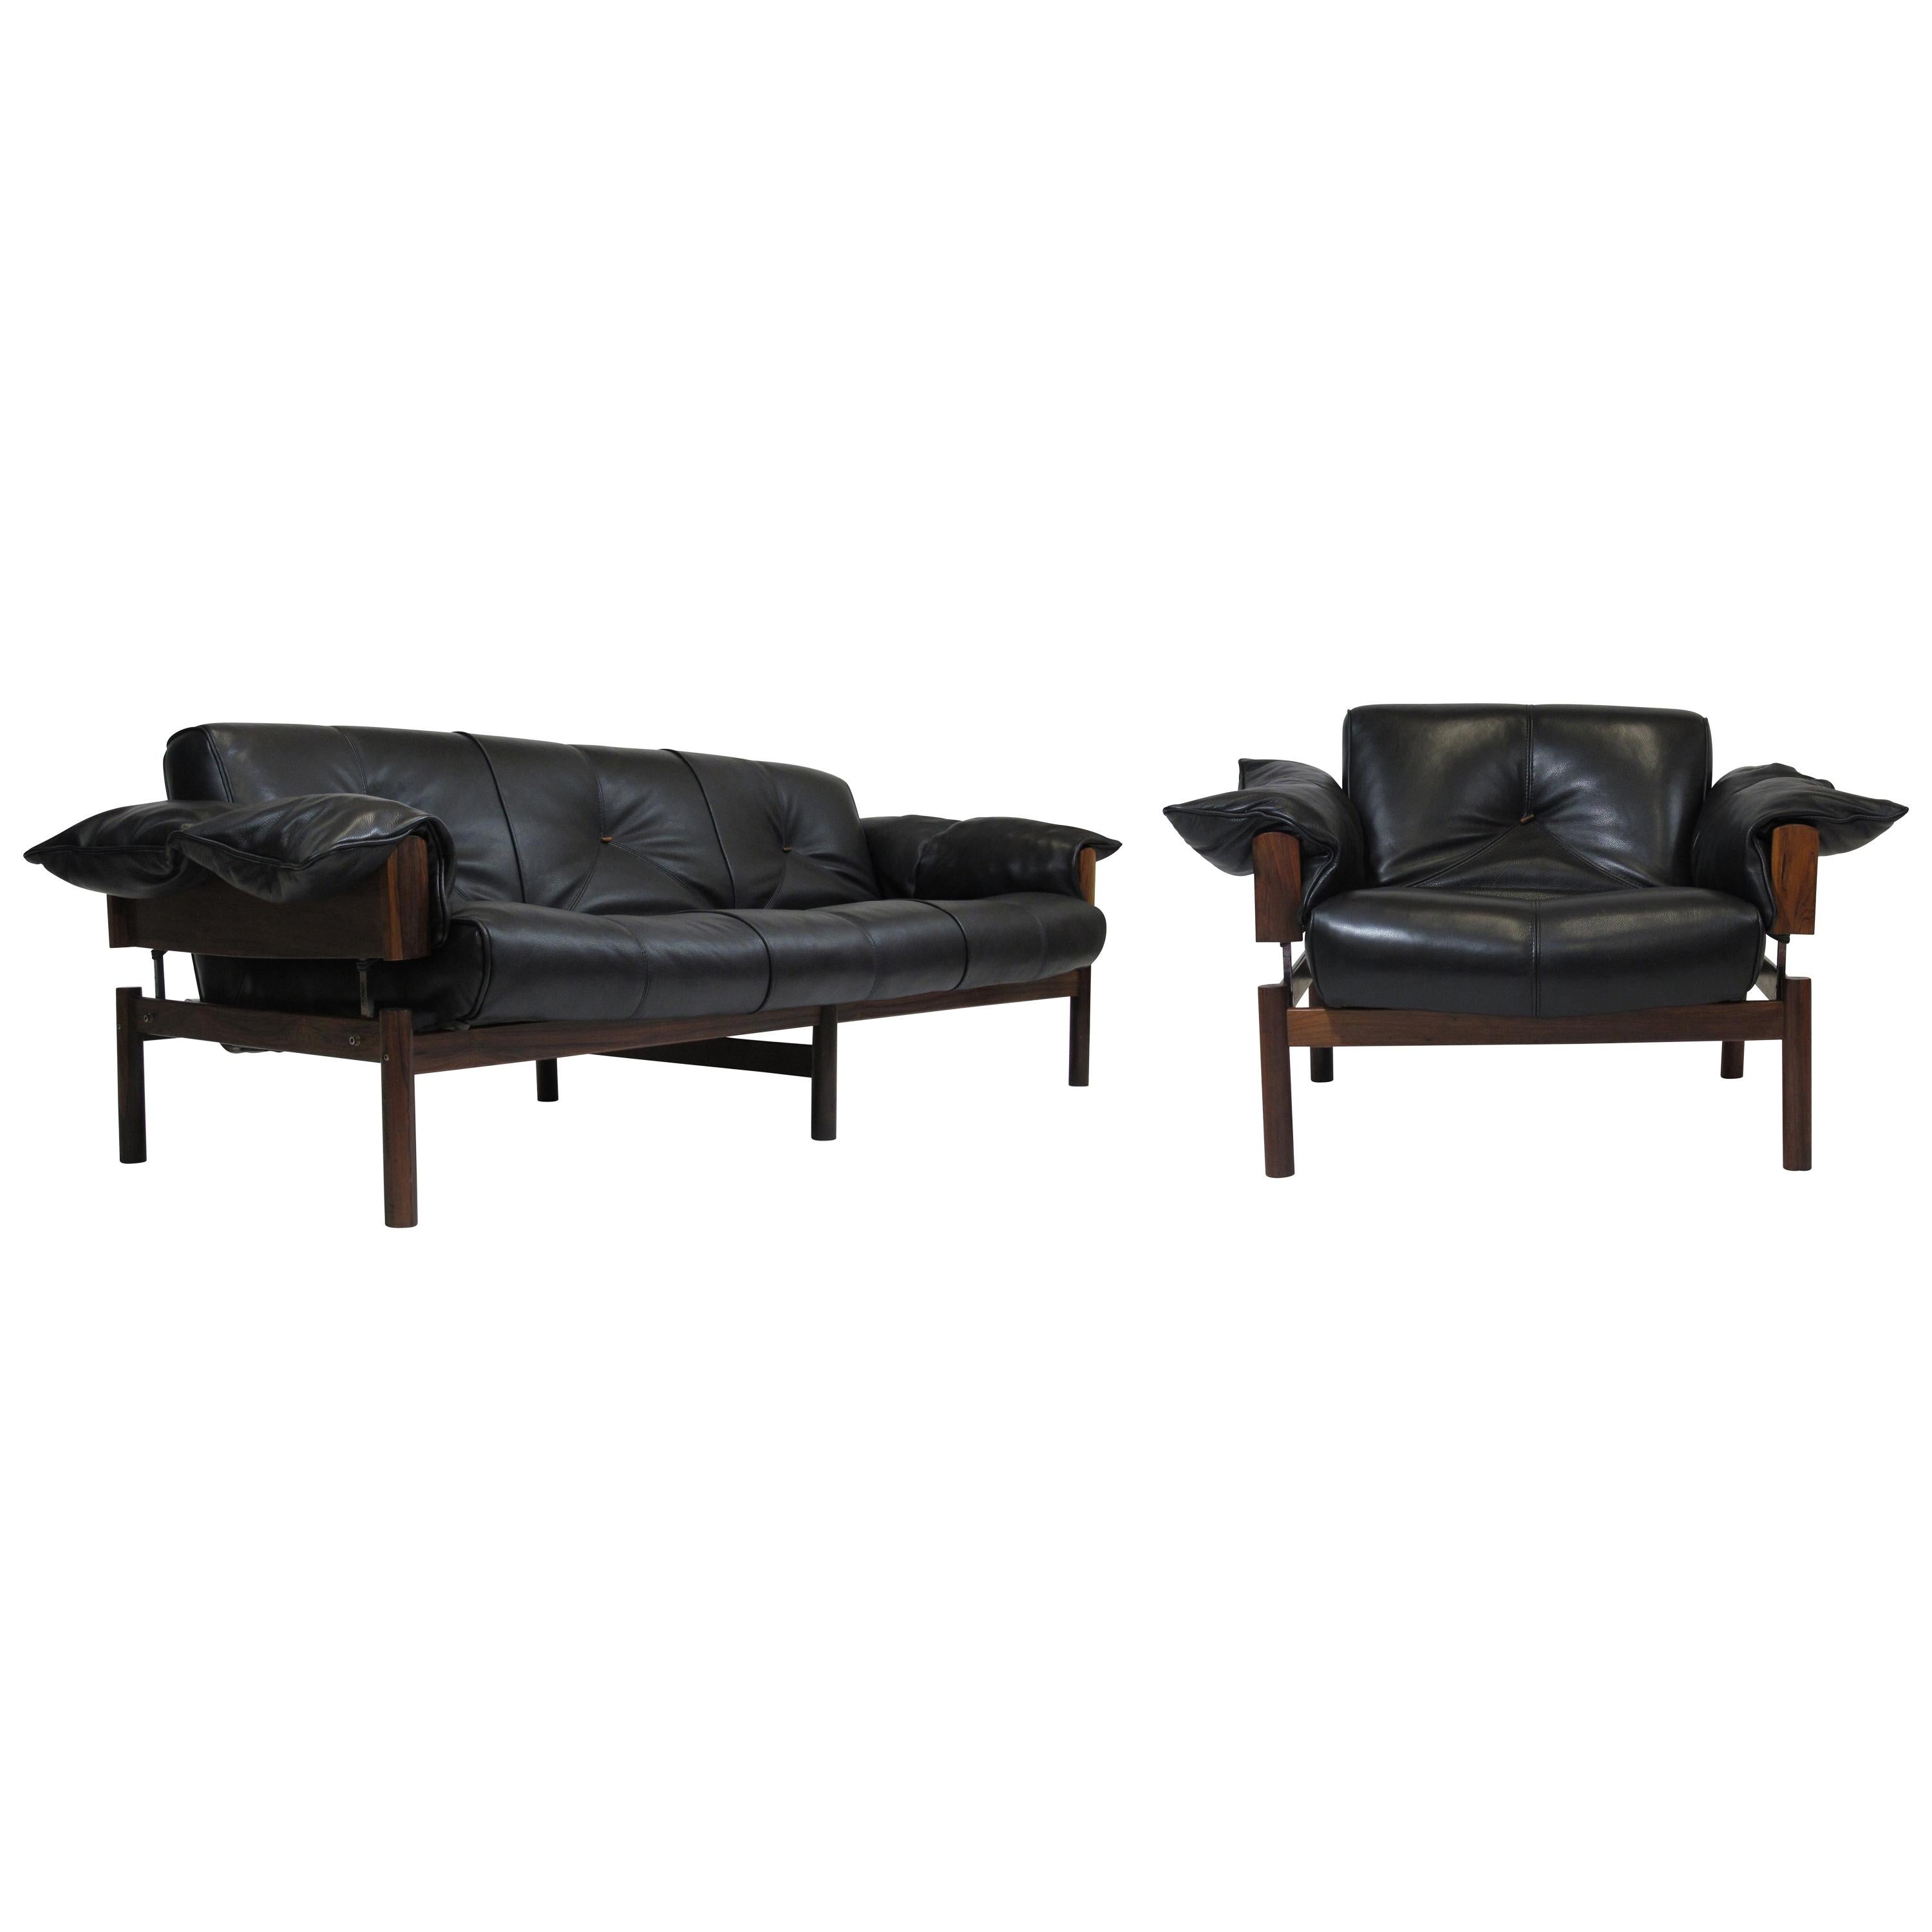 1960 Percival Lafer Brazilian Rosewood Sofa and Chair in Black Leather